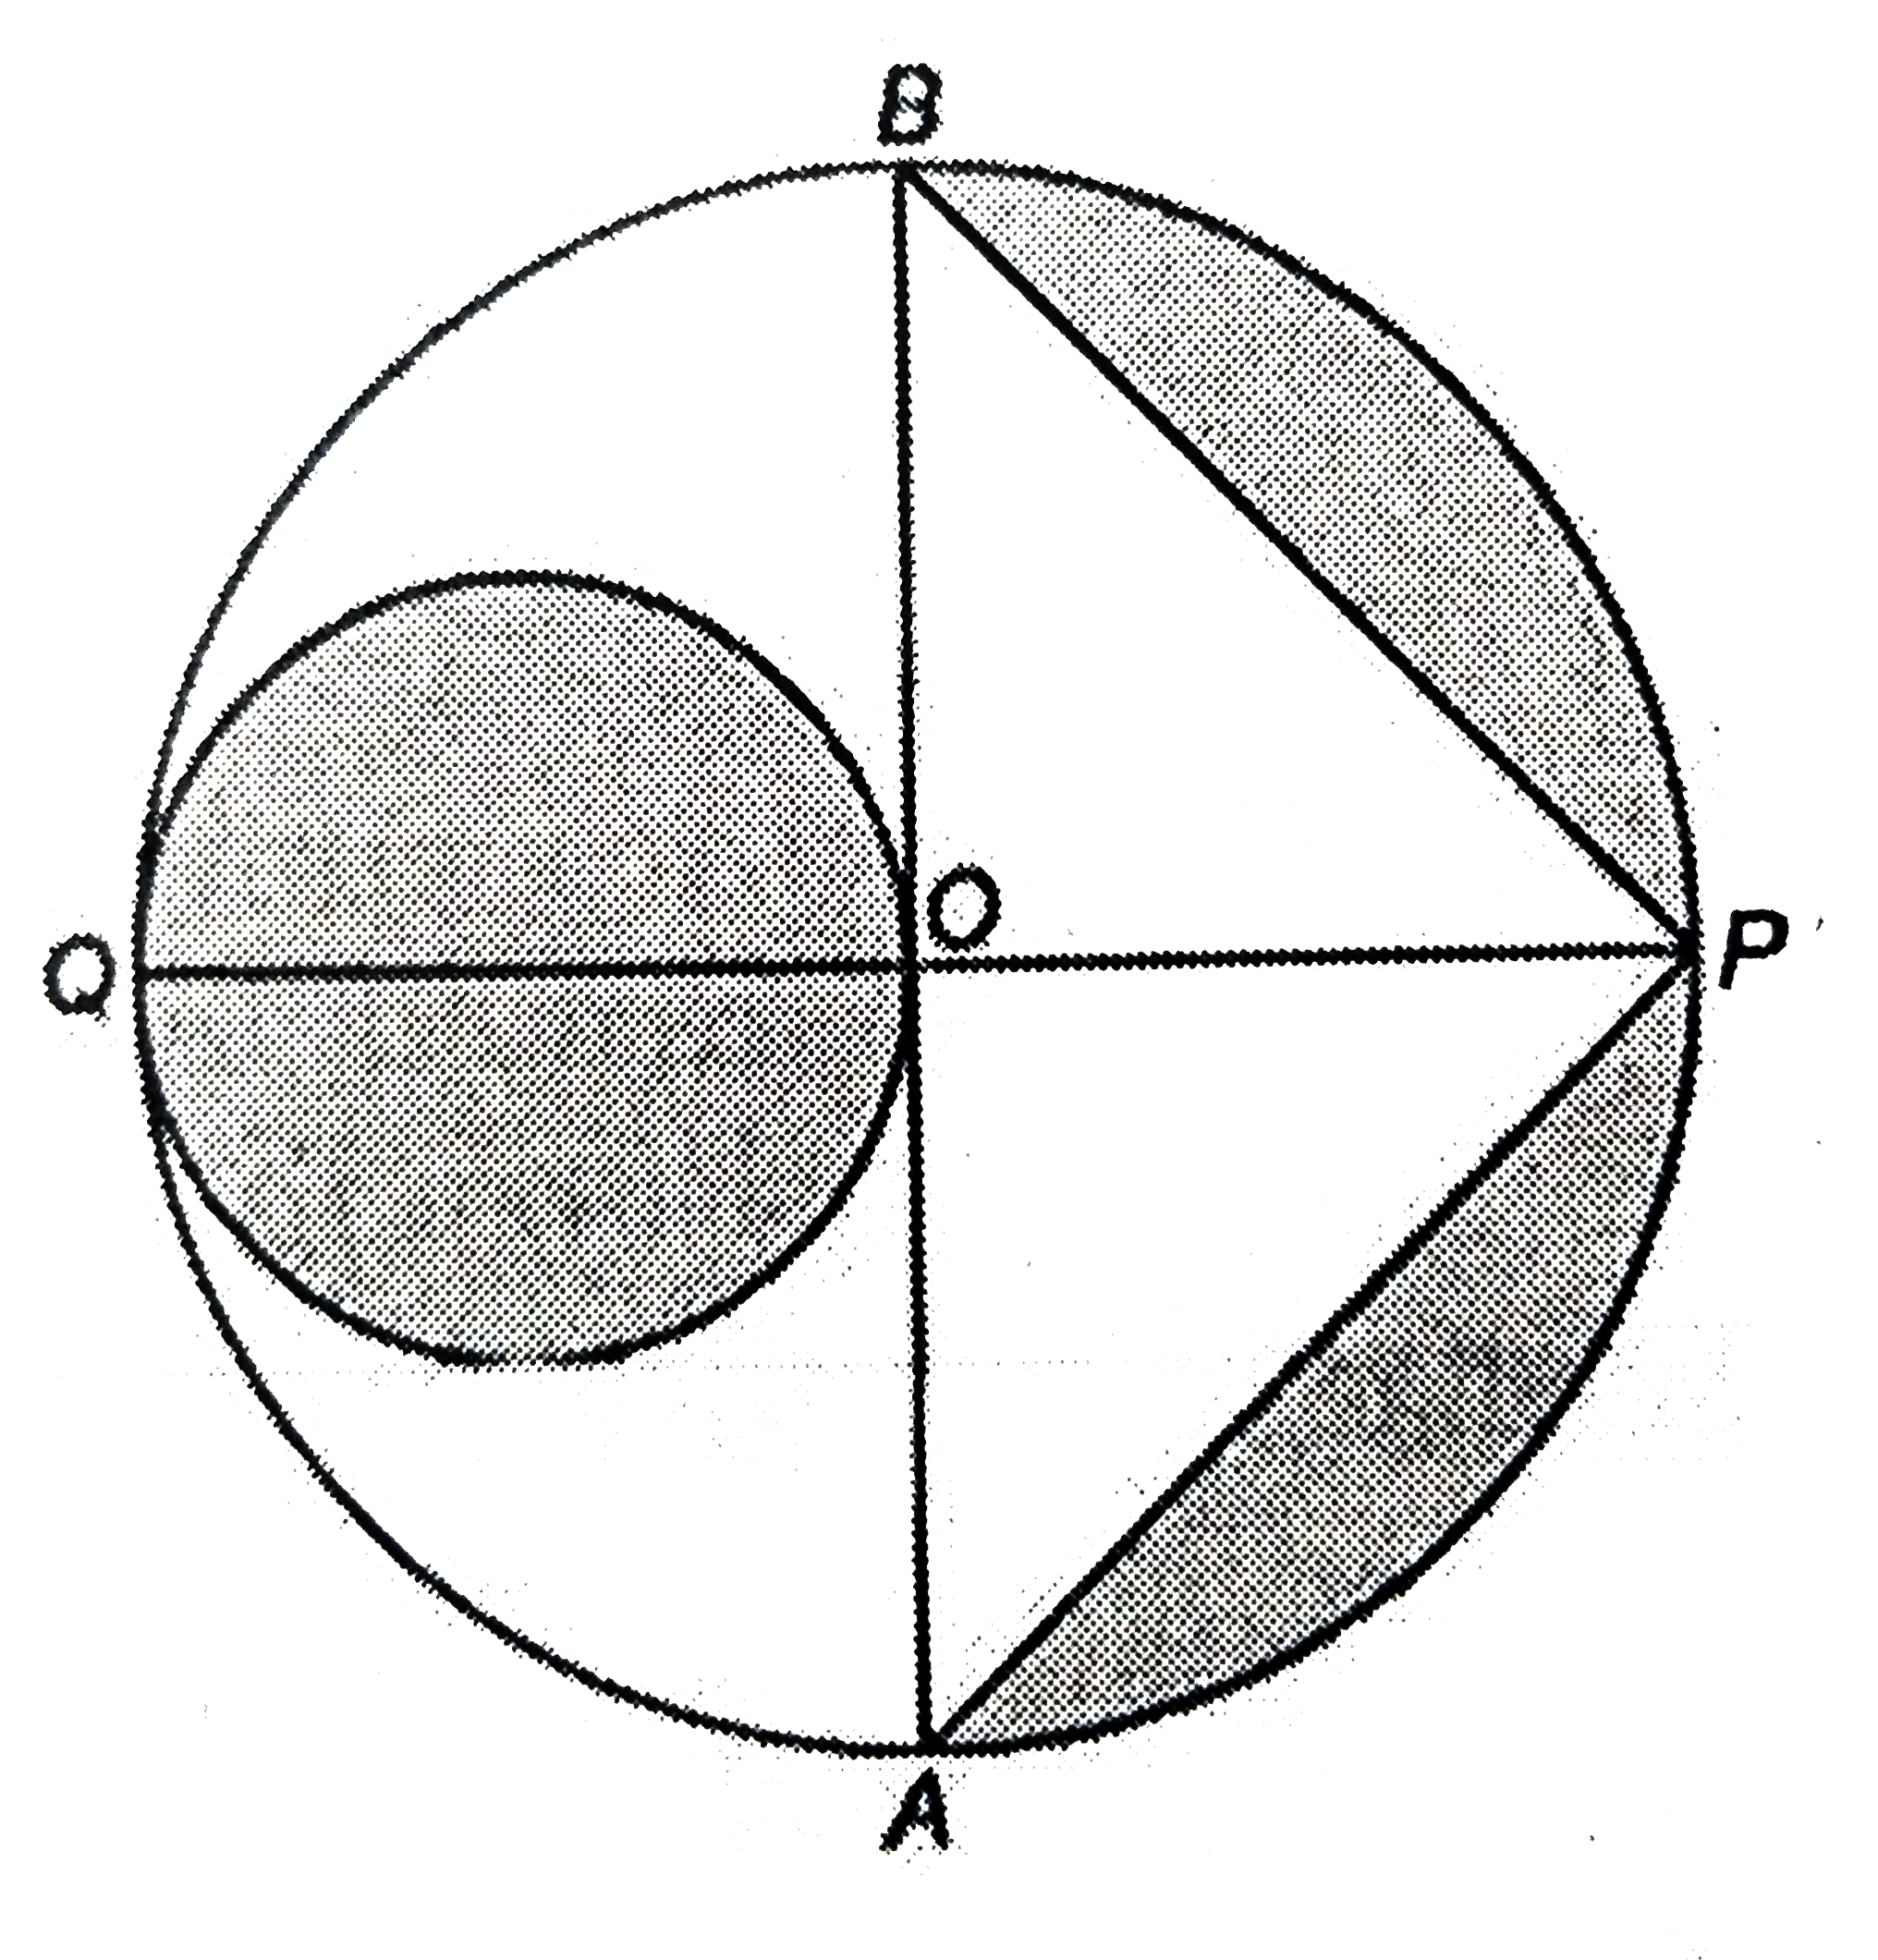 In the given figure, AB and PQ are perpendicular diameters of the circle whose centre is O and radius OA = 7 cm. Find the area of the shade region.